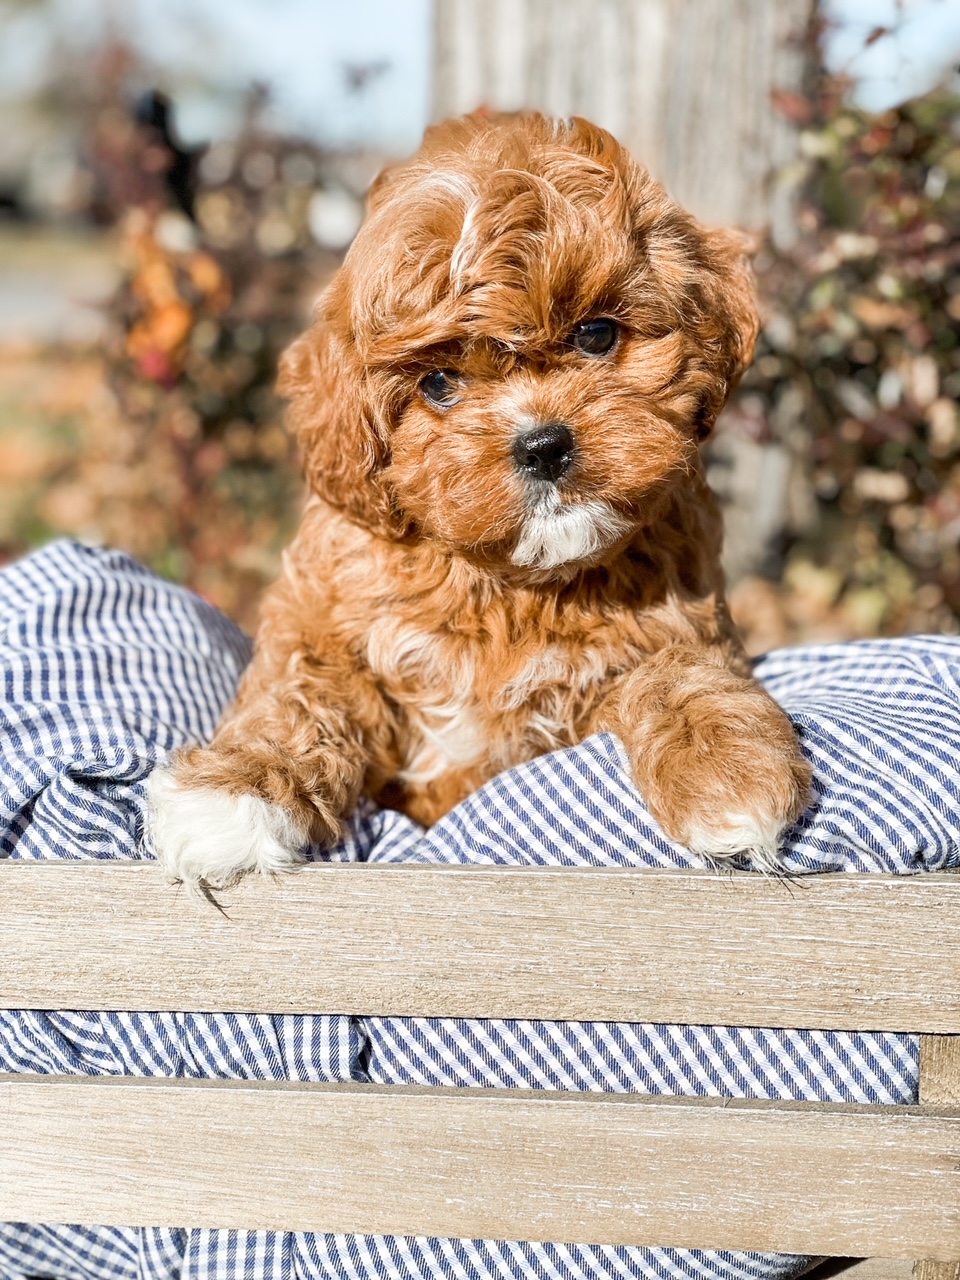 A small brown and white puppy sitting obediently on a wooden bench, displaying its adorable innocence.